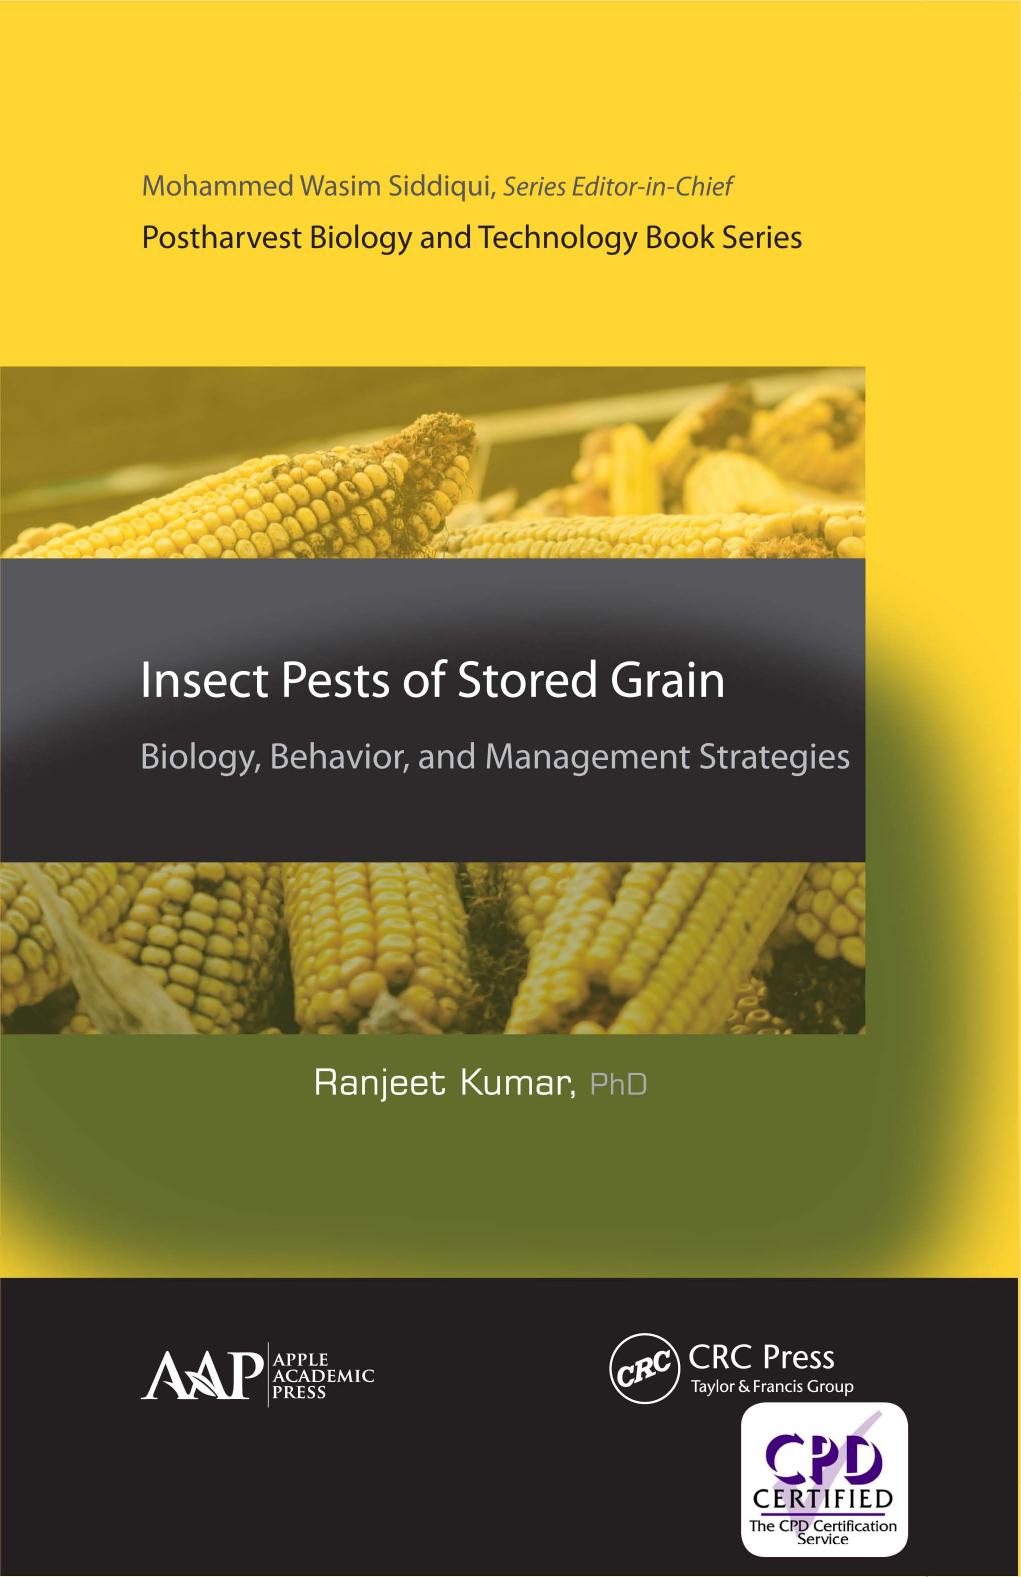 INSECT PESTS OF STORED GRAIN   Biology, Behavior, and Management Strategies